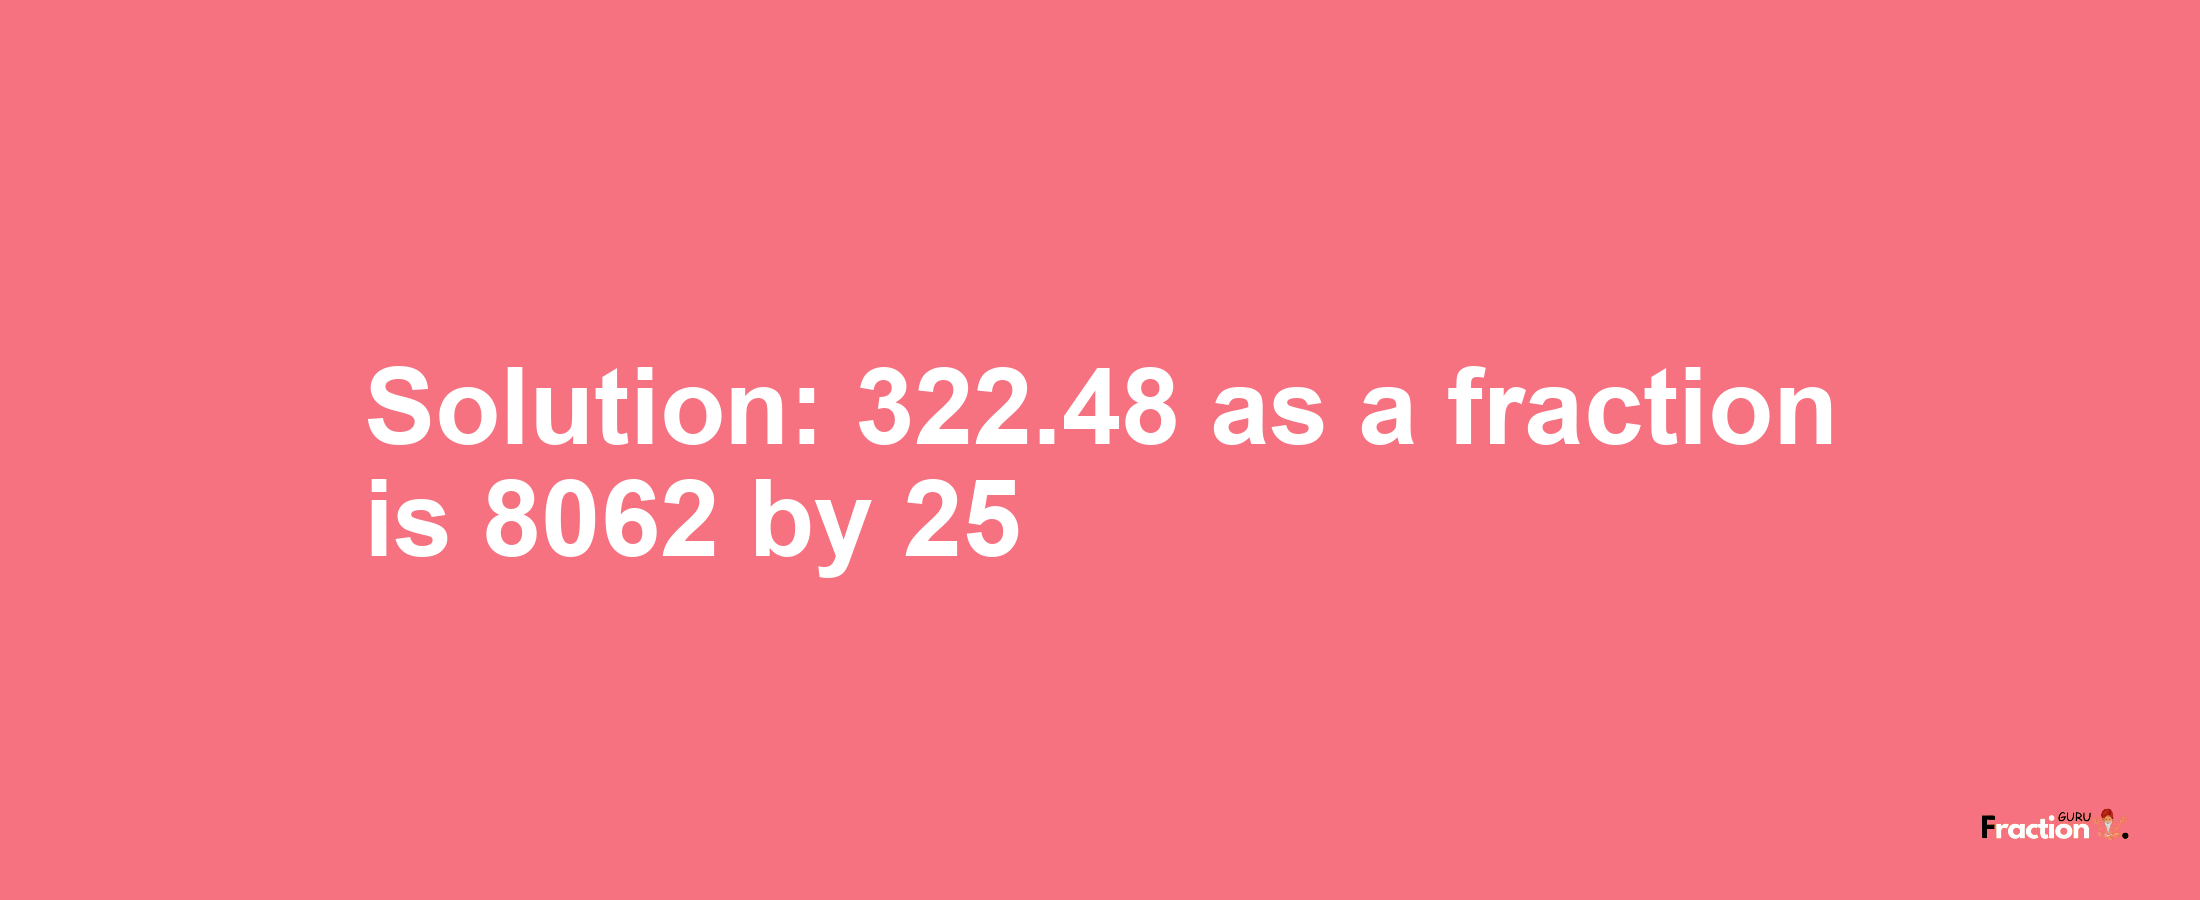 Solution:322.48 as a fraction is 8062/25